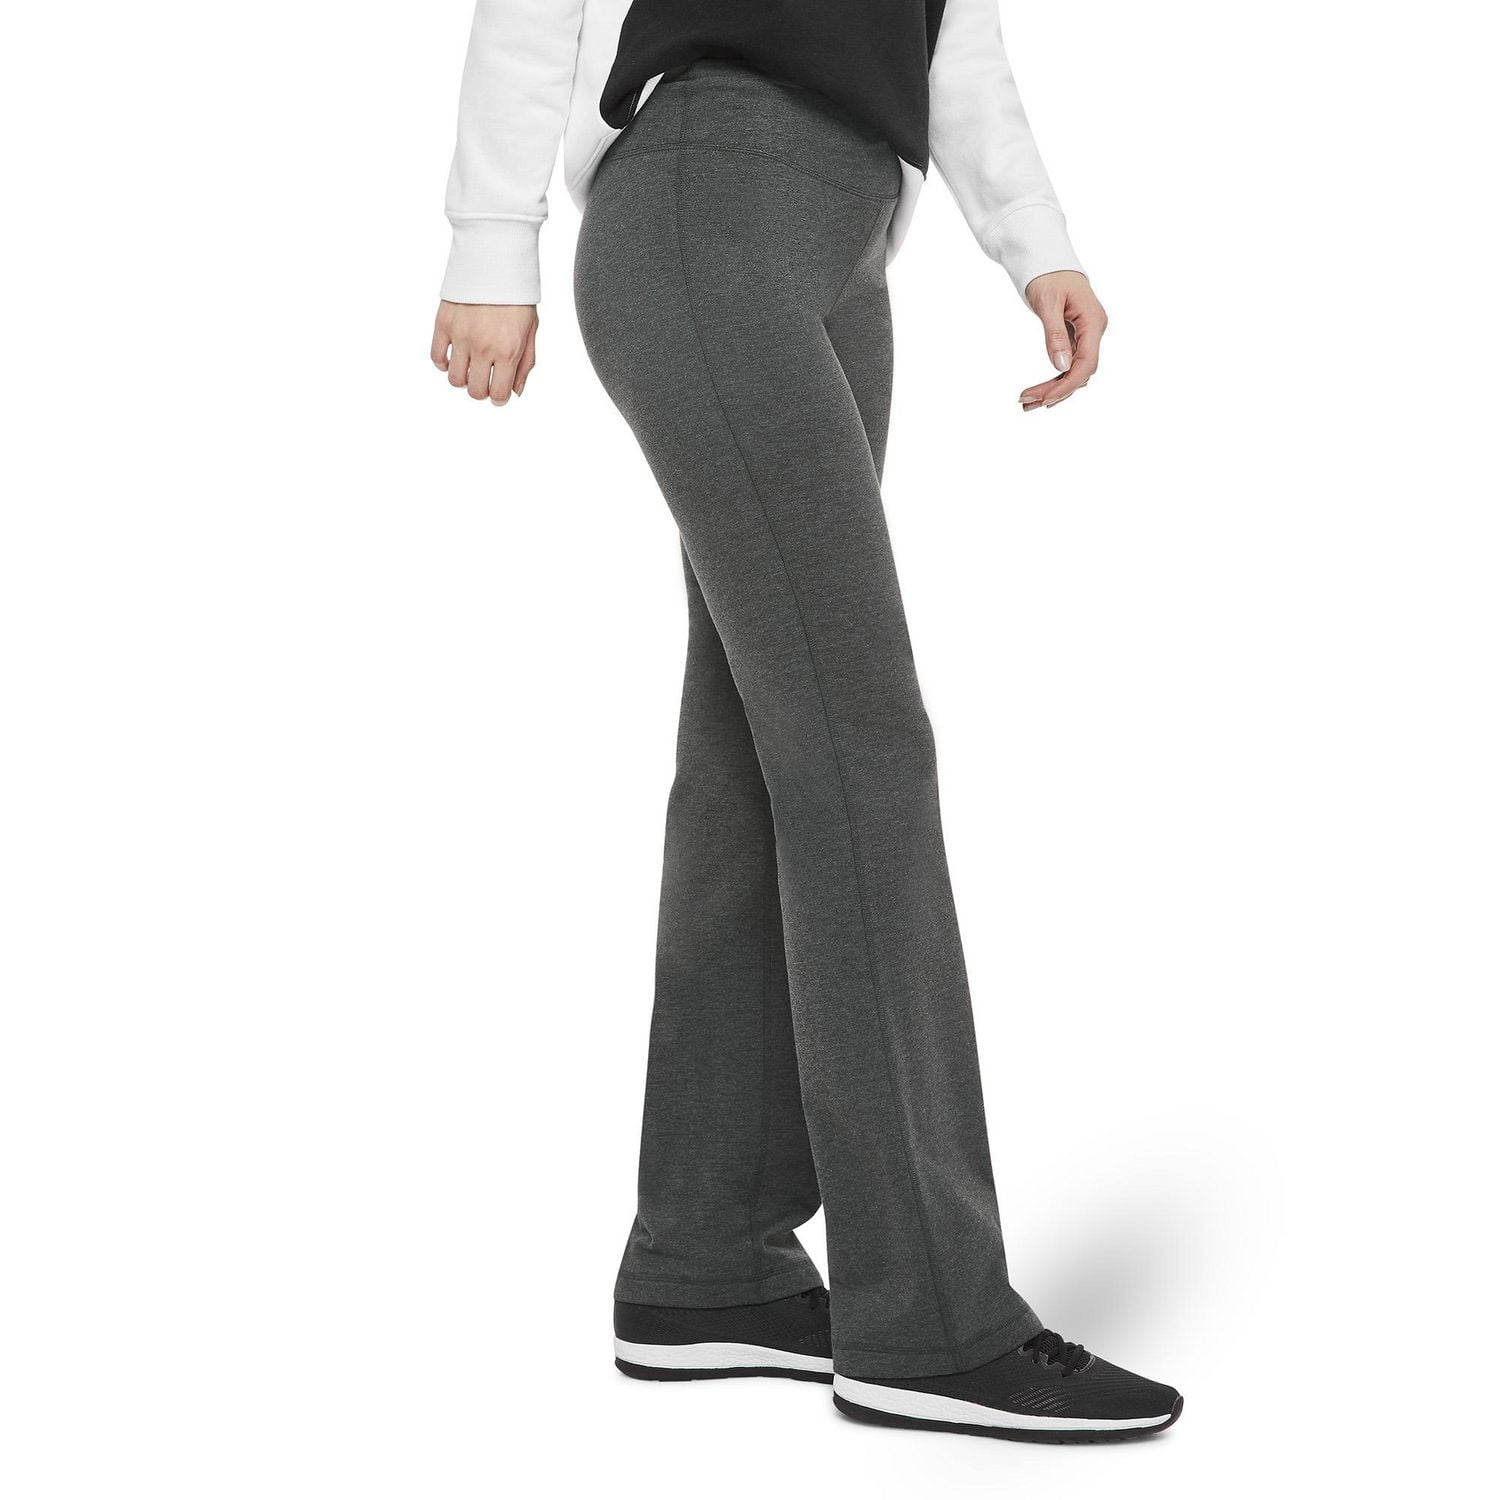 Energy Zone Women's Cotton Stretch Pocket Pant, Charcoal Heather